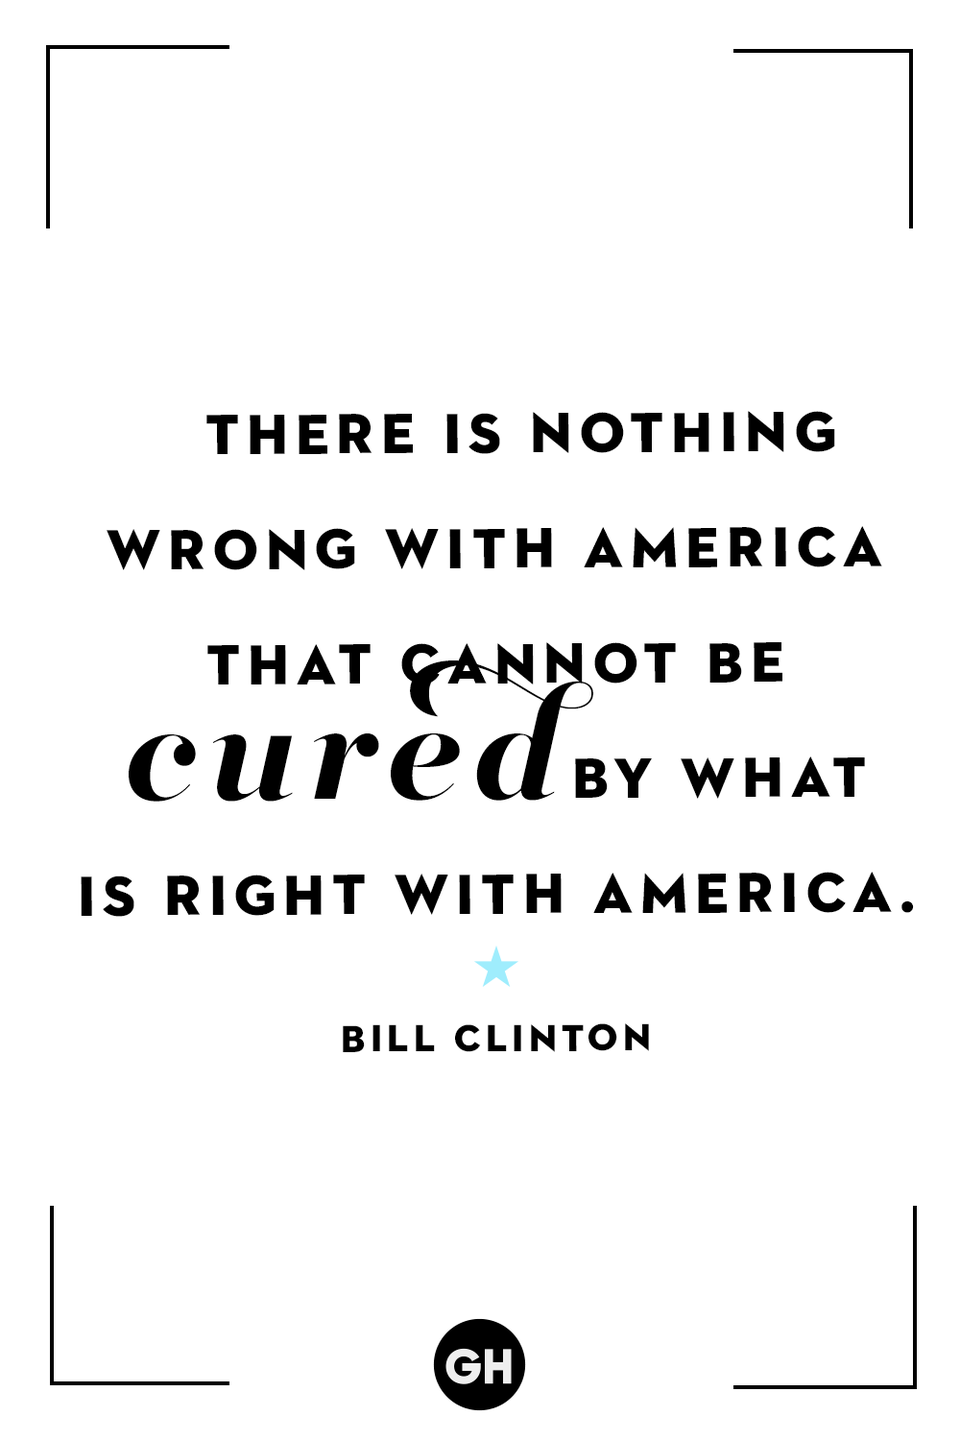 <p>"There is nothing wrong with America that cannot be cured by what is right with America."</p>